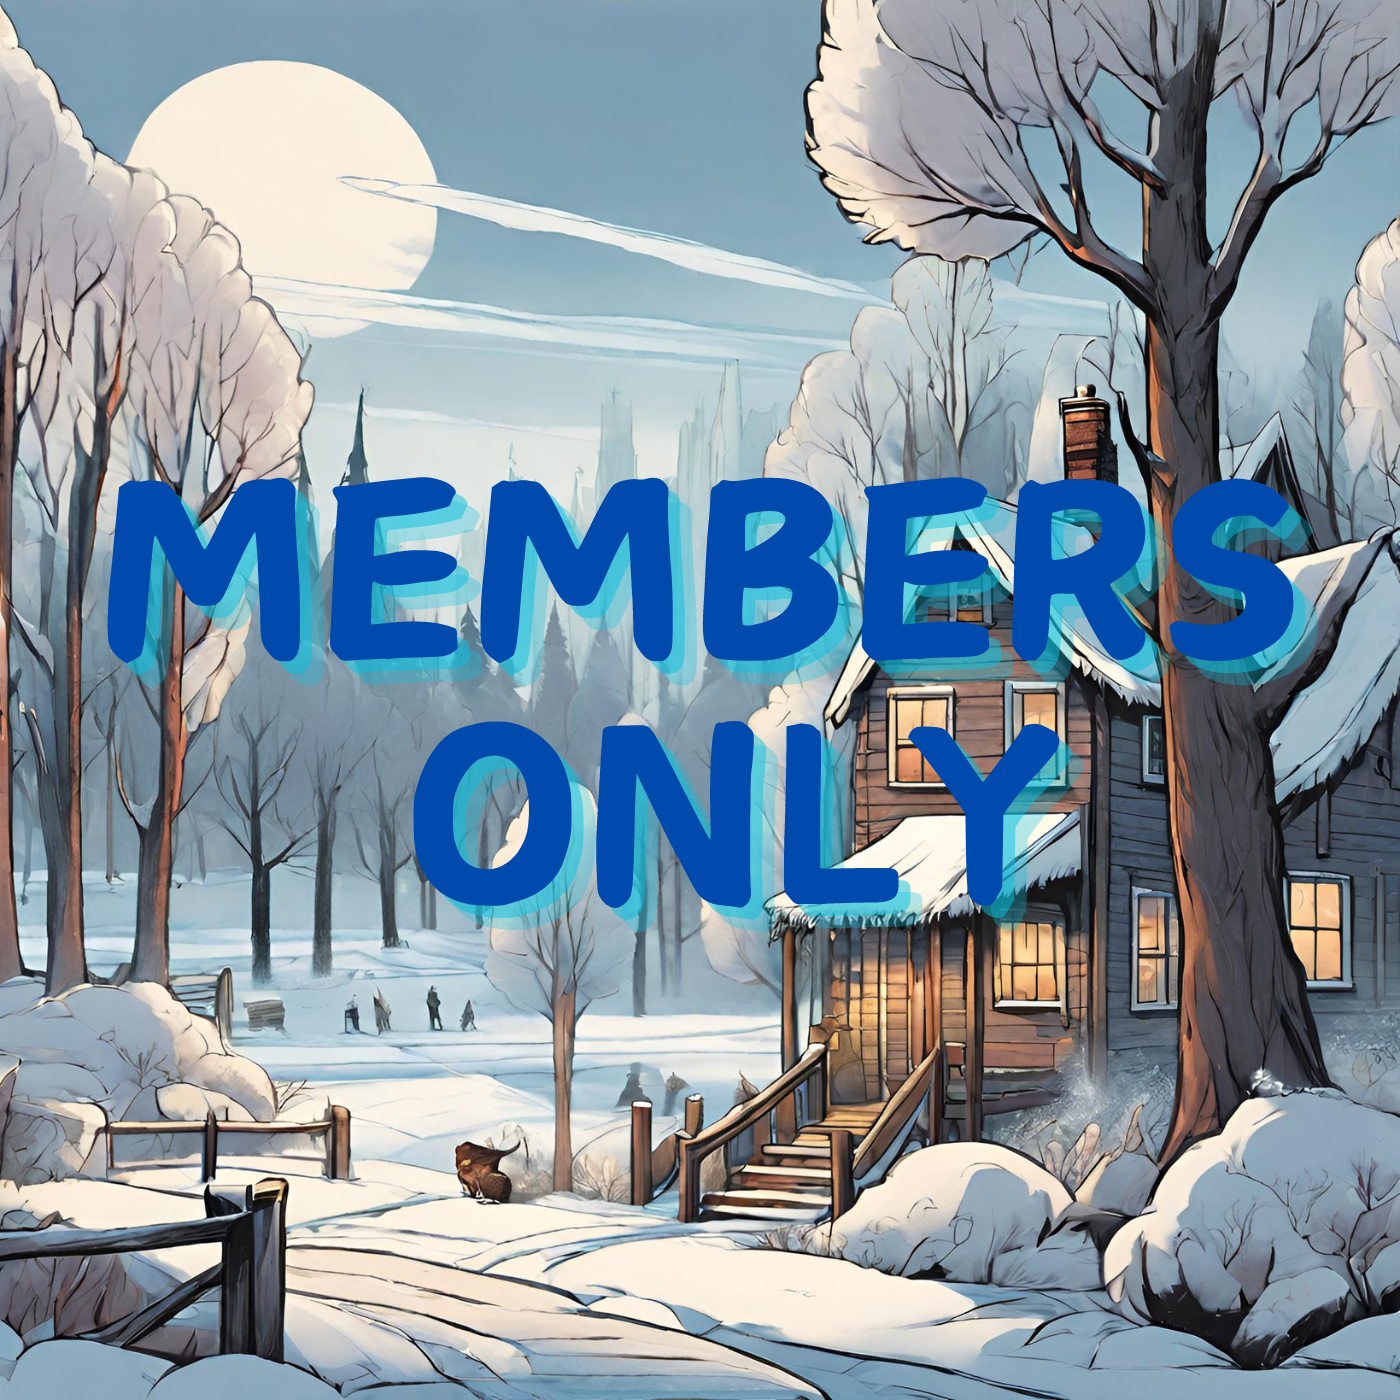 members only